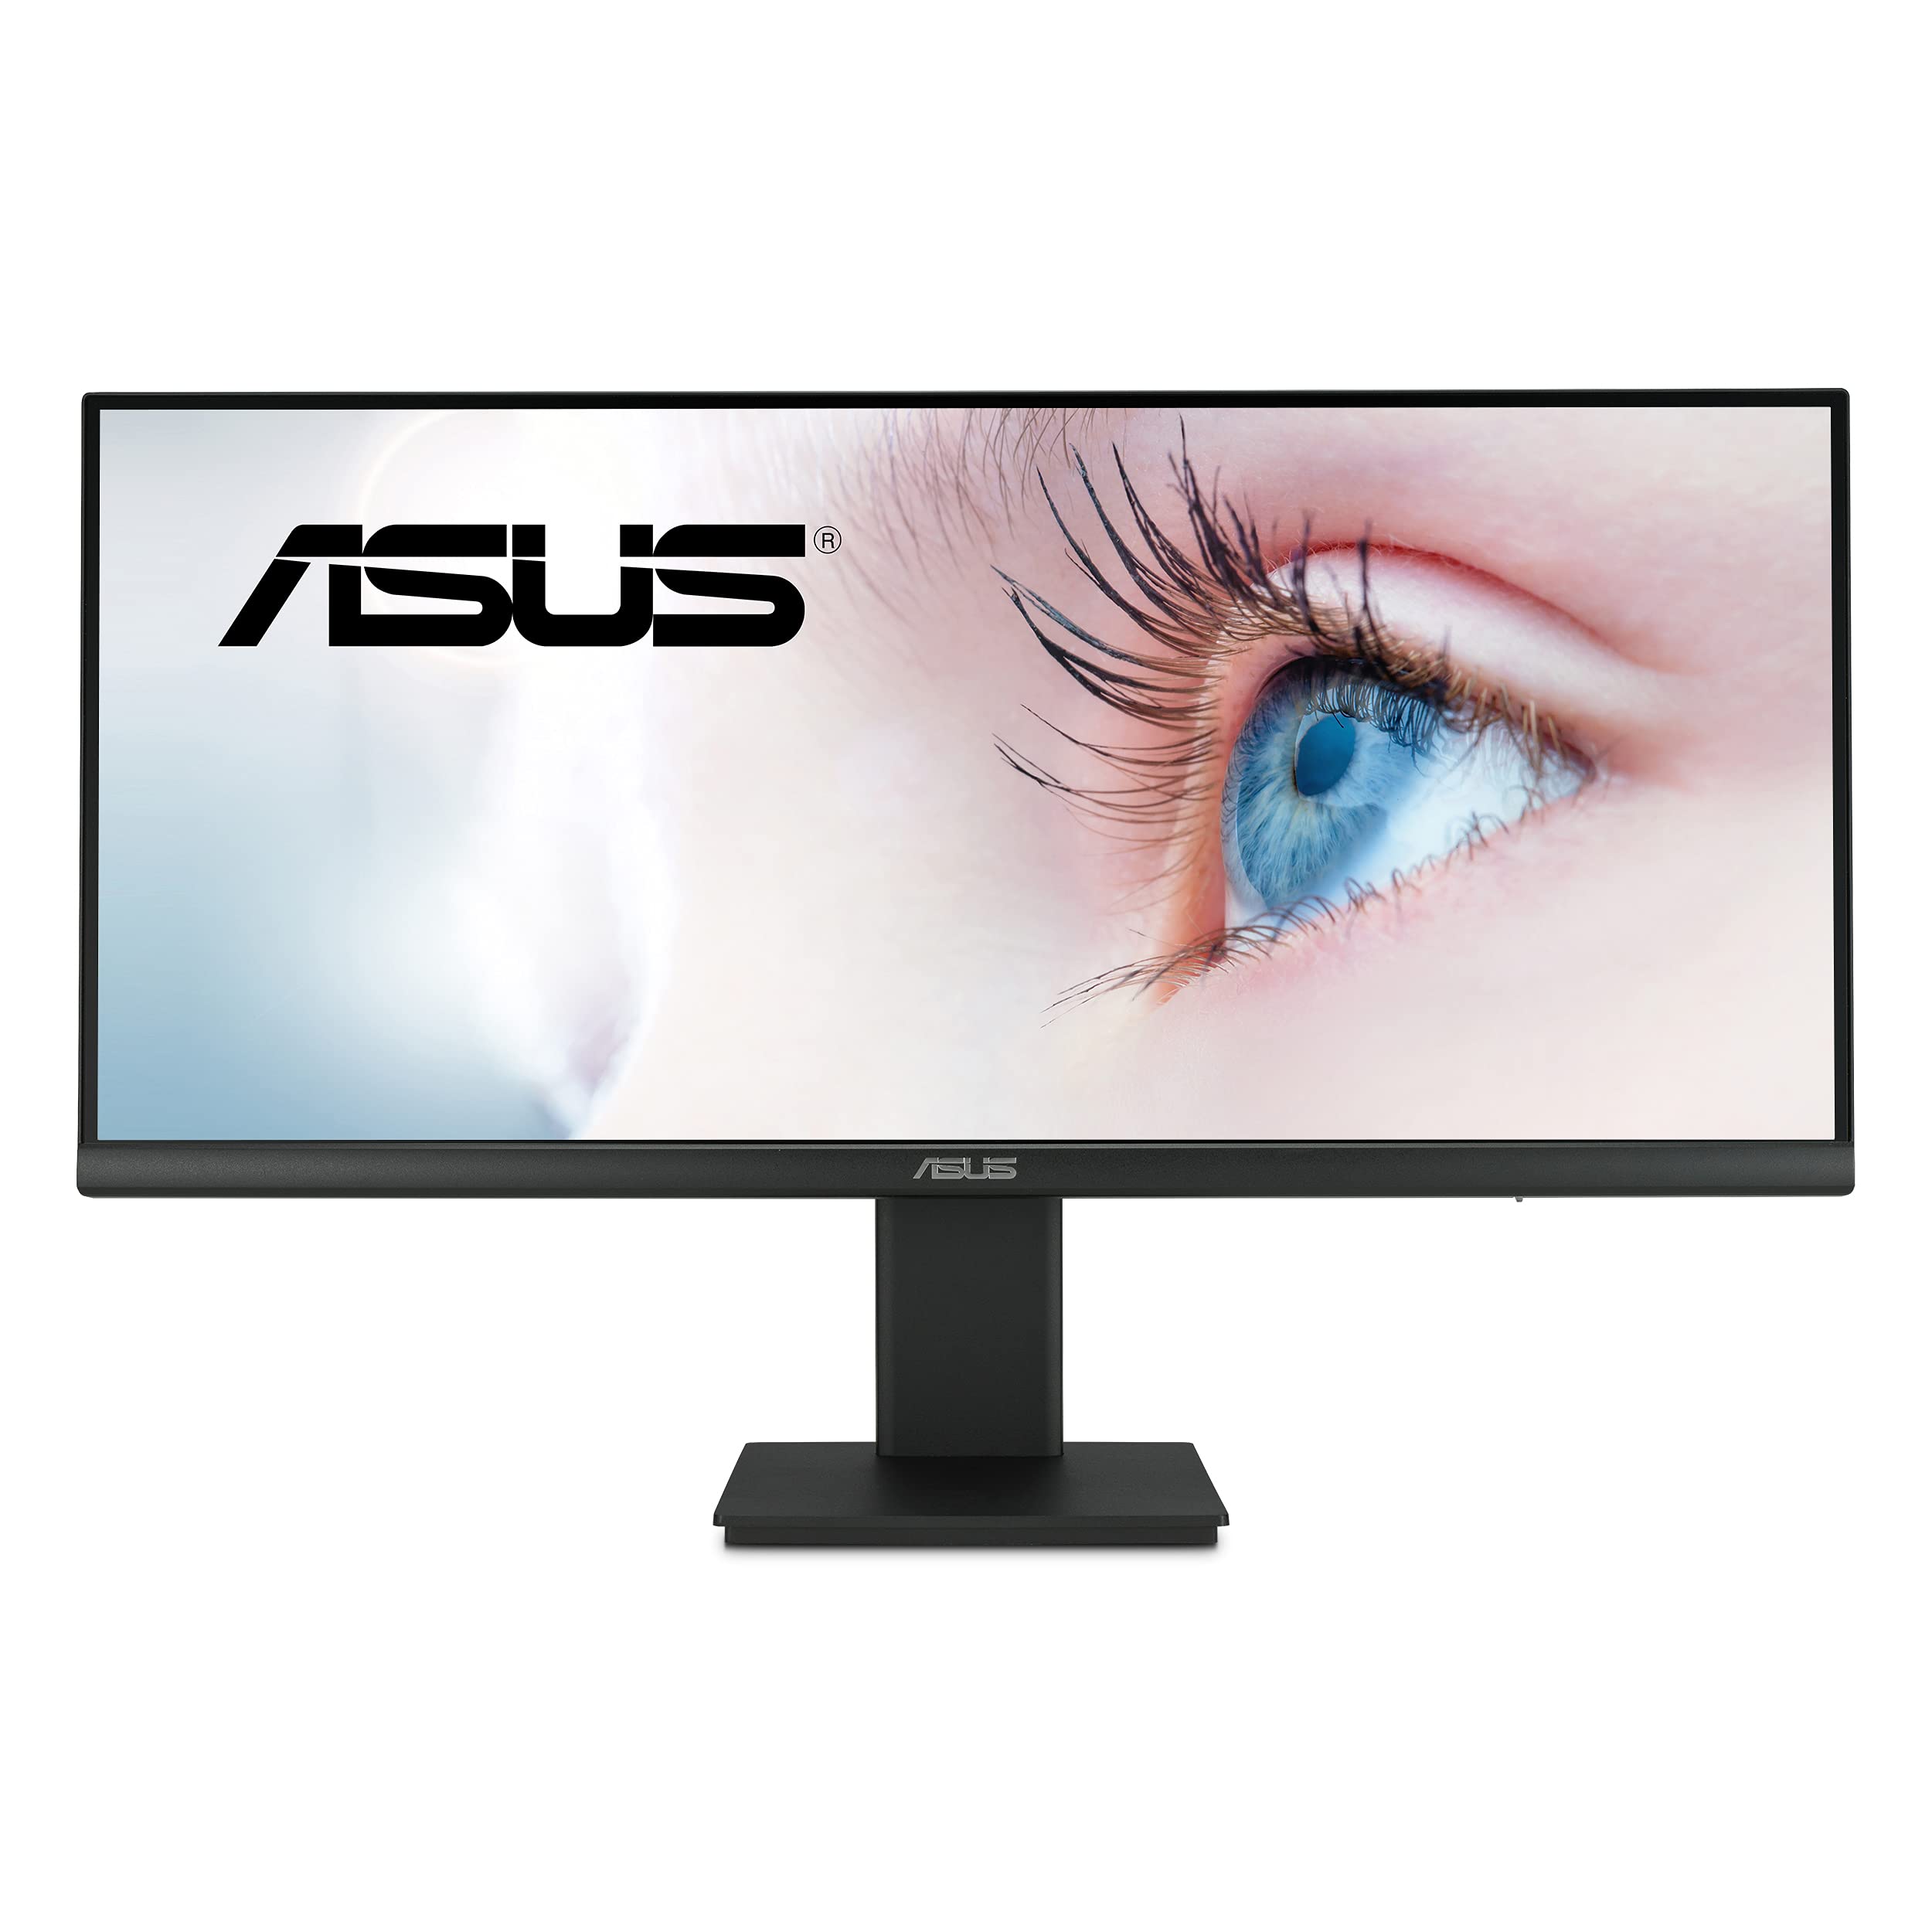 Asus 29” 1080P Ultrawide HDR Monitor (VP299CL) - 21:9 (2560 x 1080), IPS, 75Hz, 1ms, USB-C w+ 15W Power Delivery, FreeSync, ...